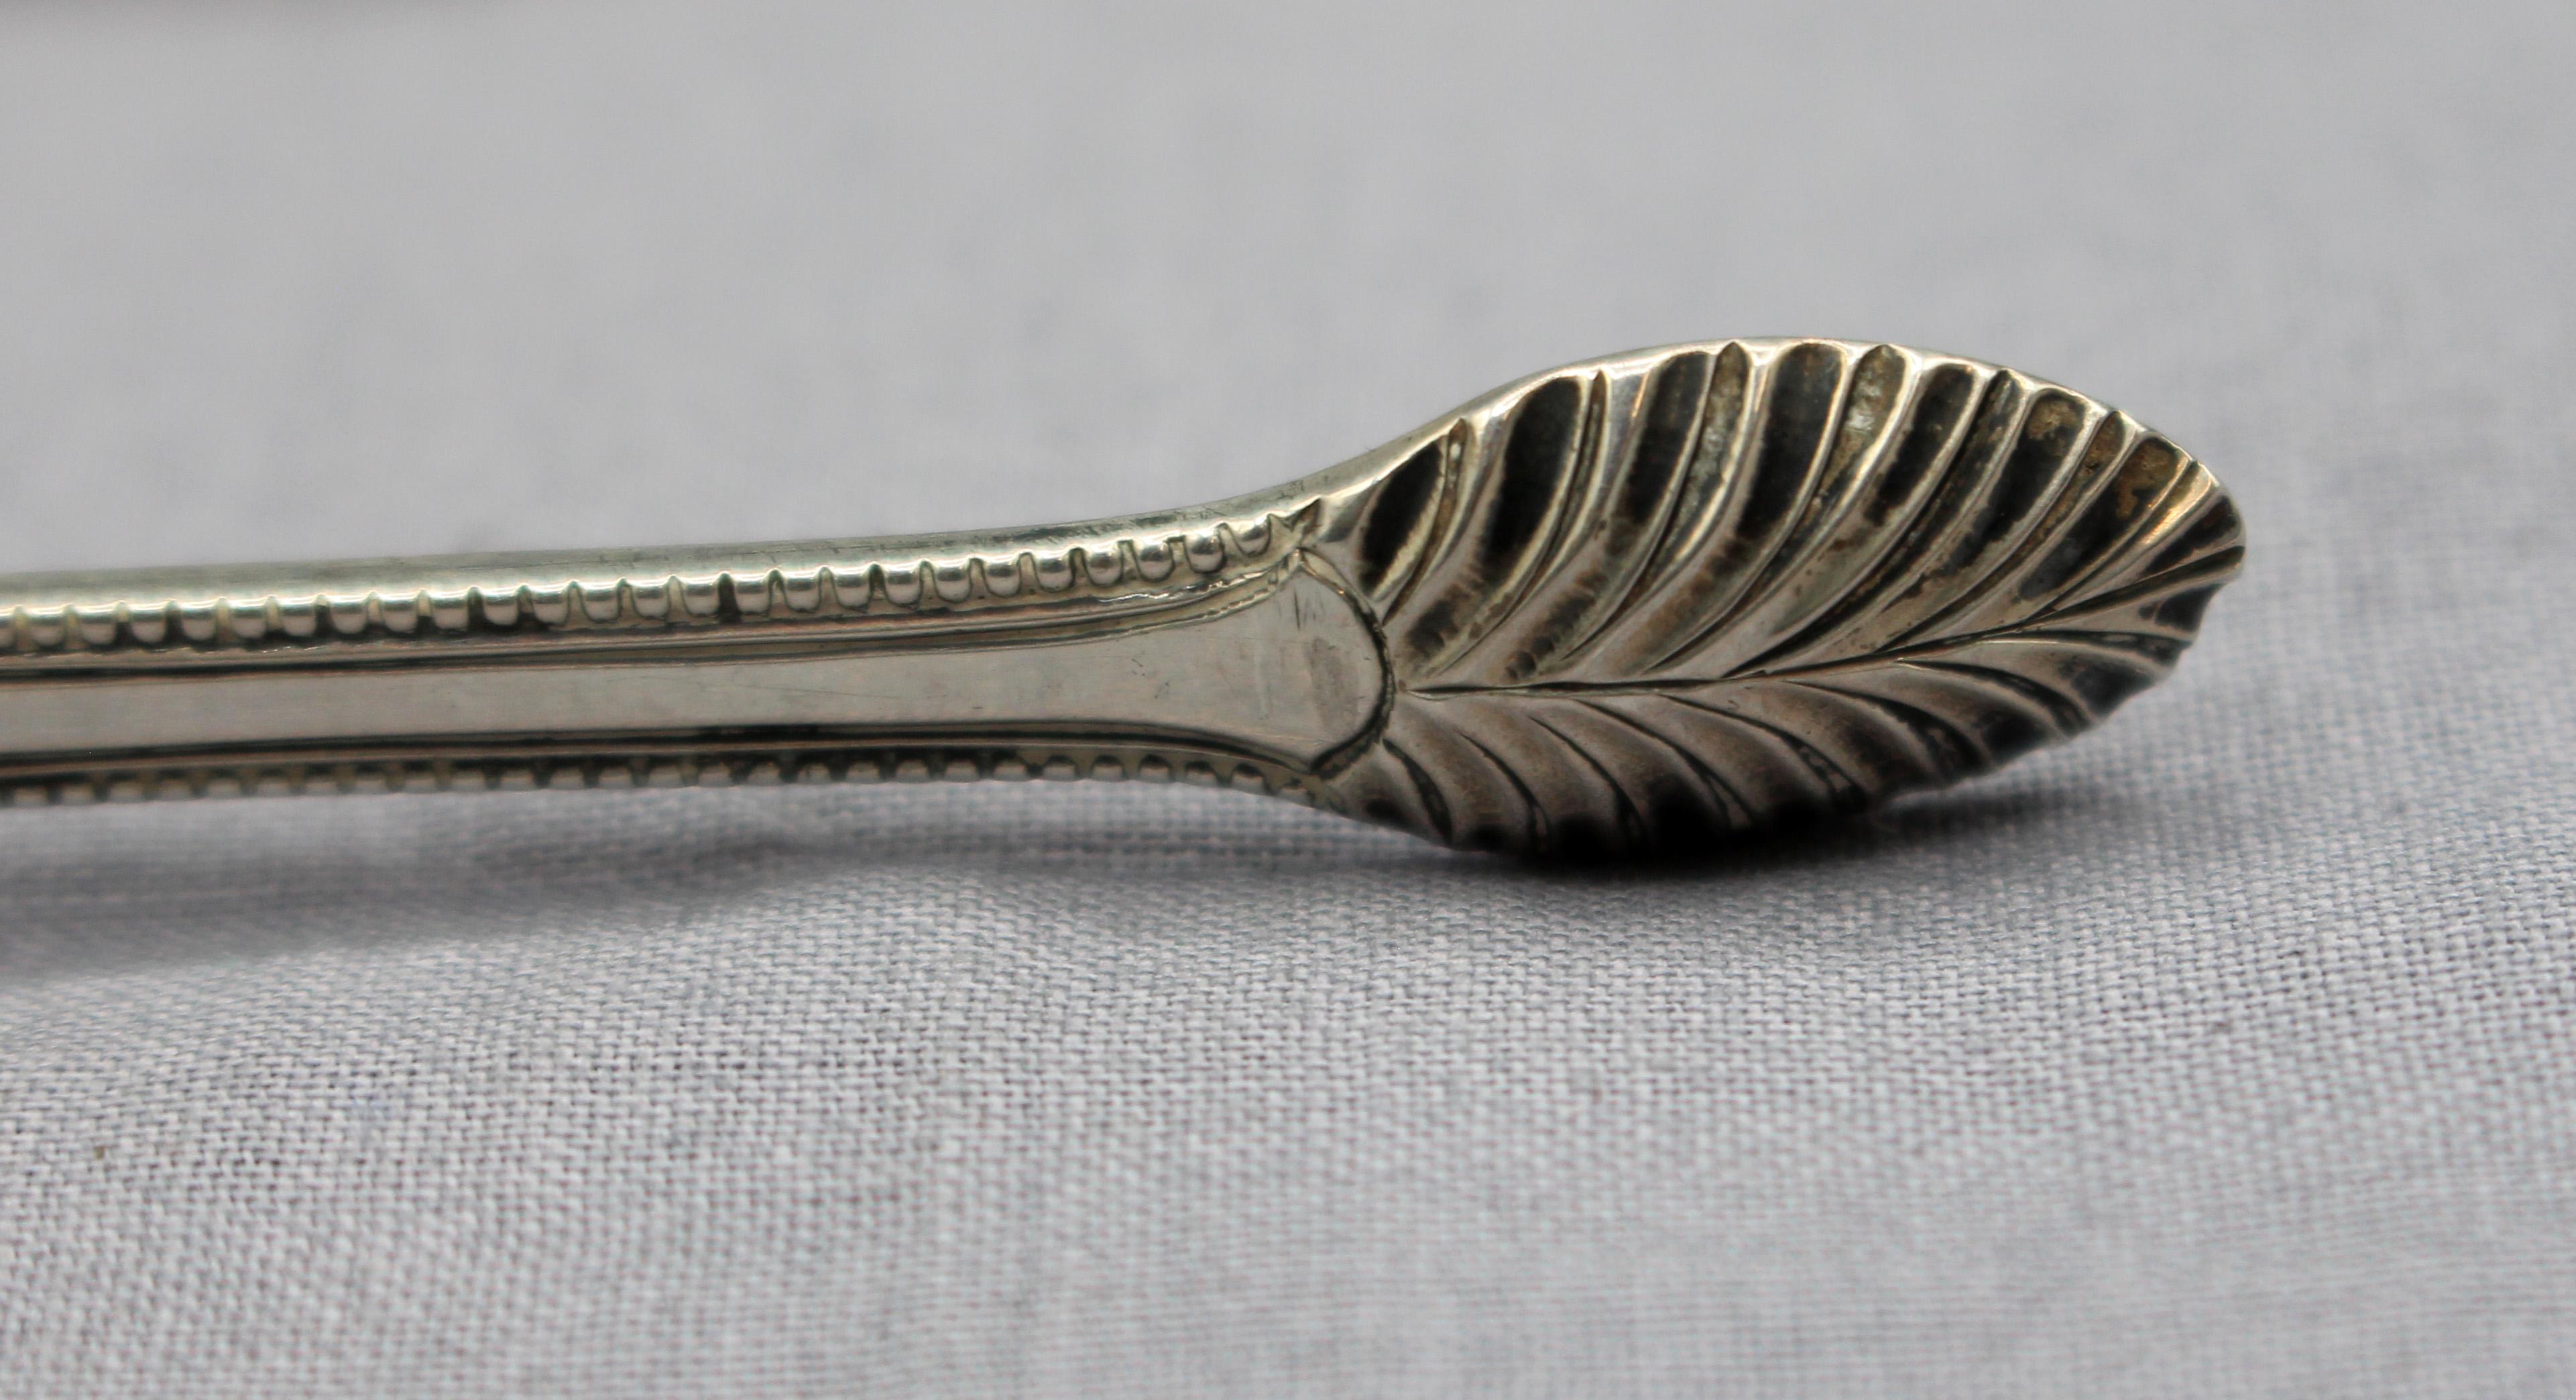 Sterling silver sugar tongs by Richard Crossley, London, 1782-90. Typically only one maker's mark & sterling mark are used. Deep, fine engraving in pure neo-classical taste. Monogram: ML. 1.10 troy oz.
5.5